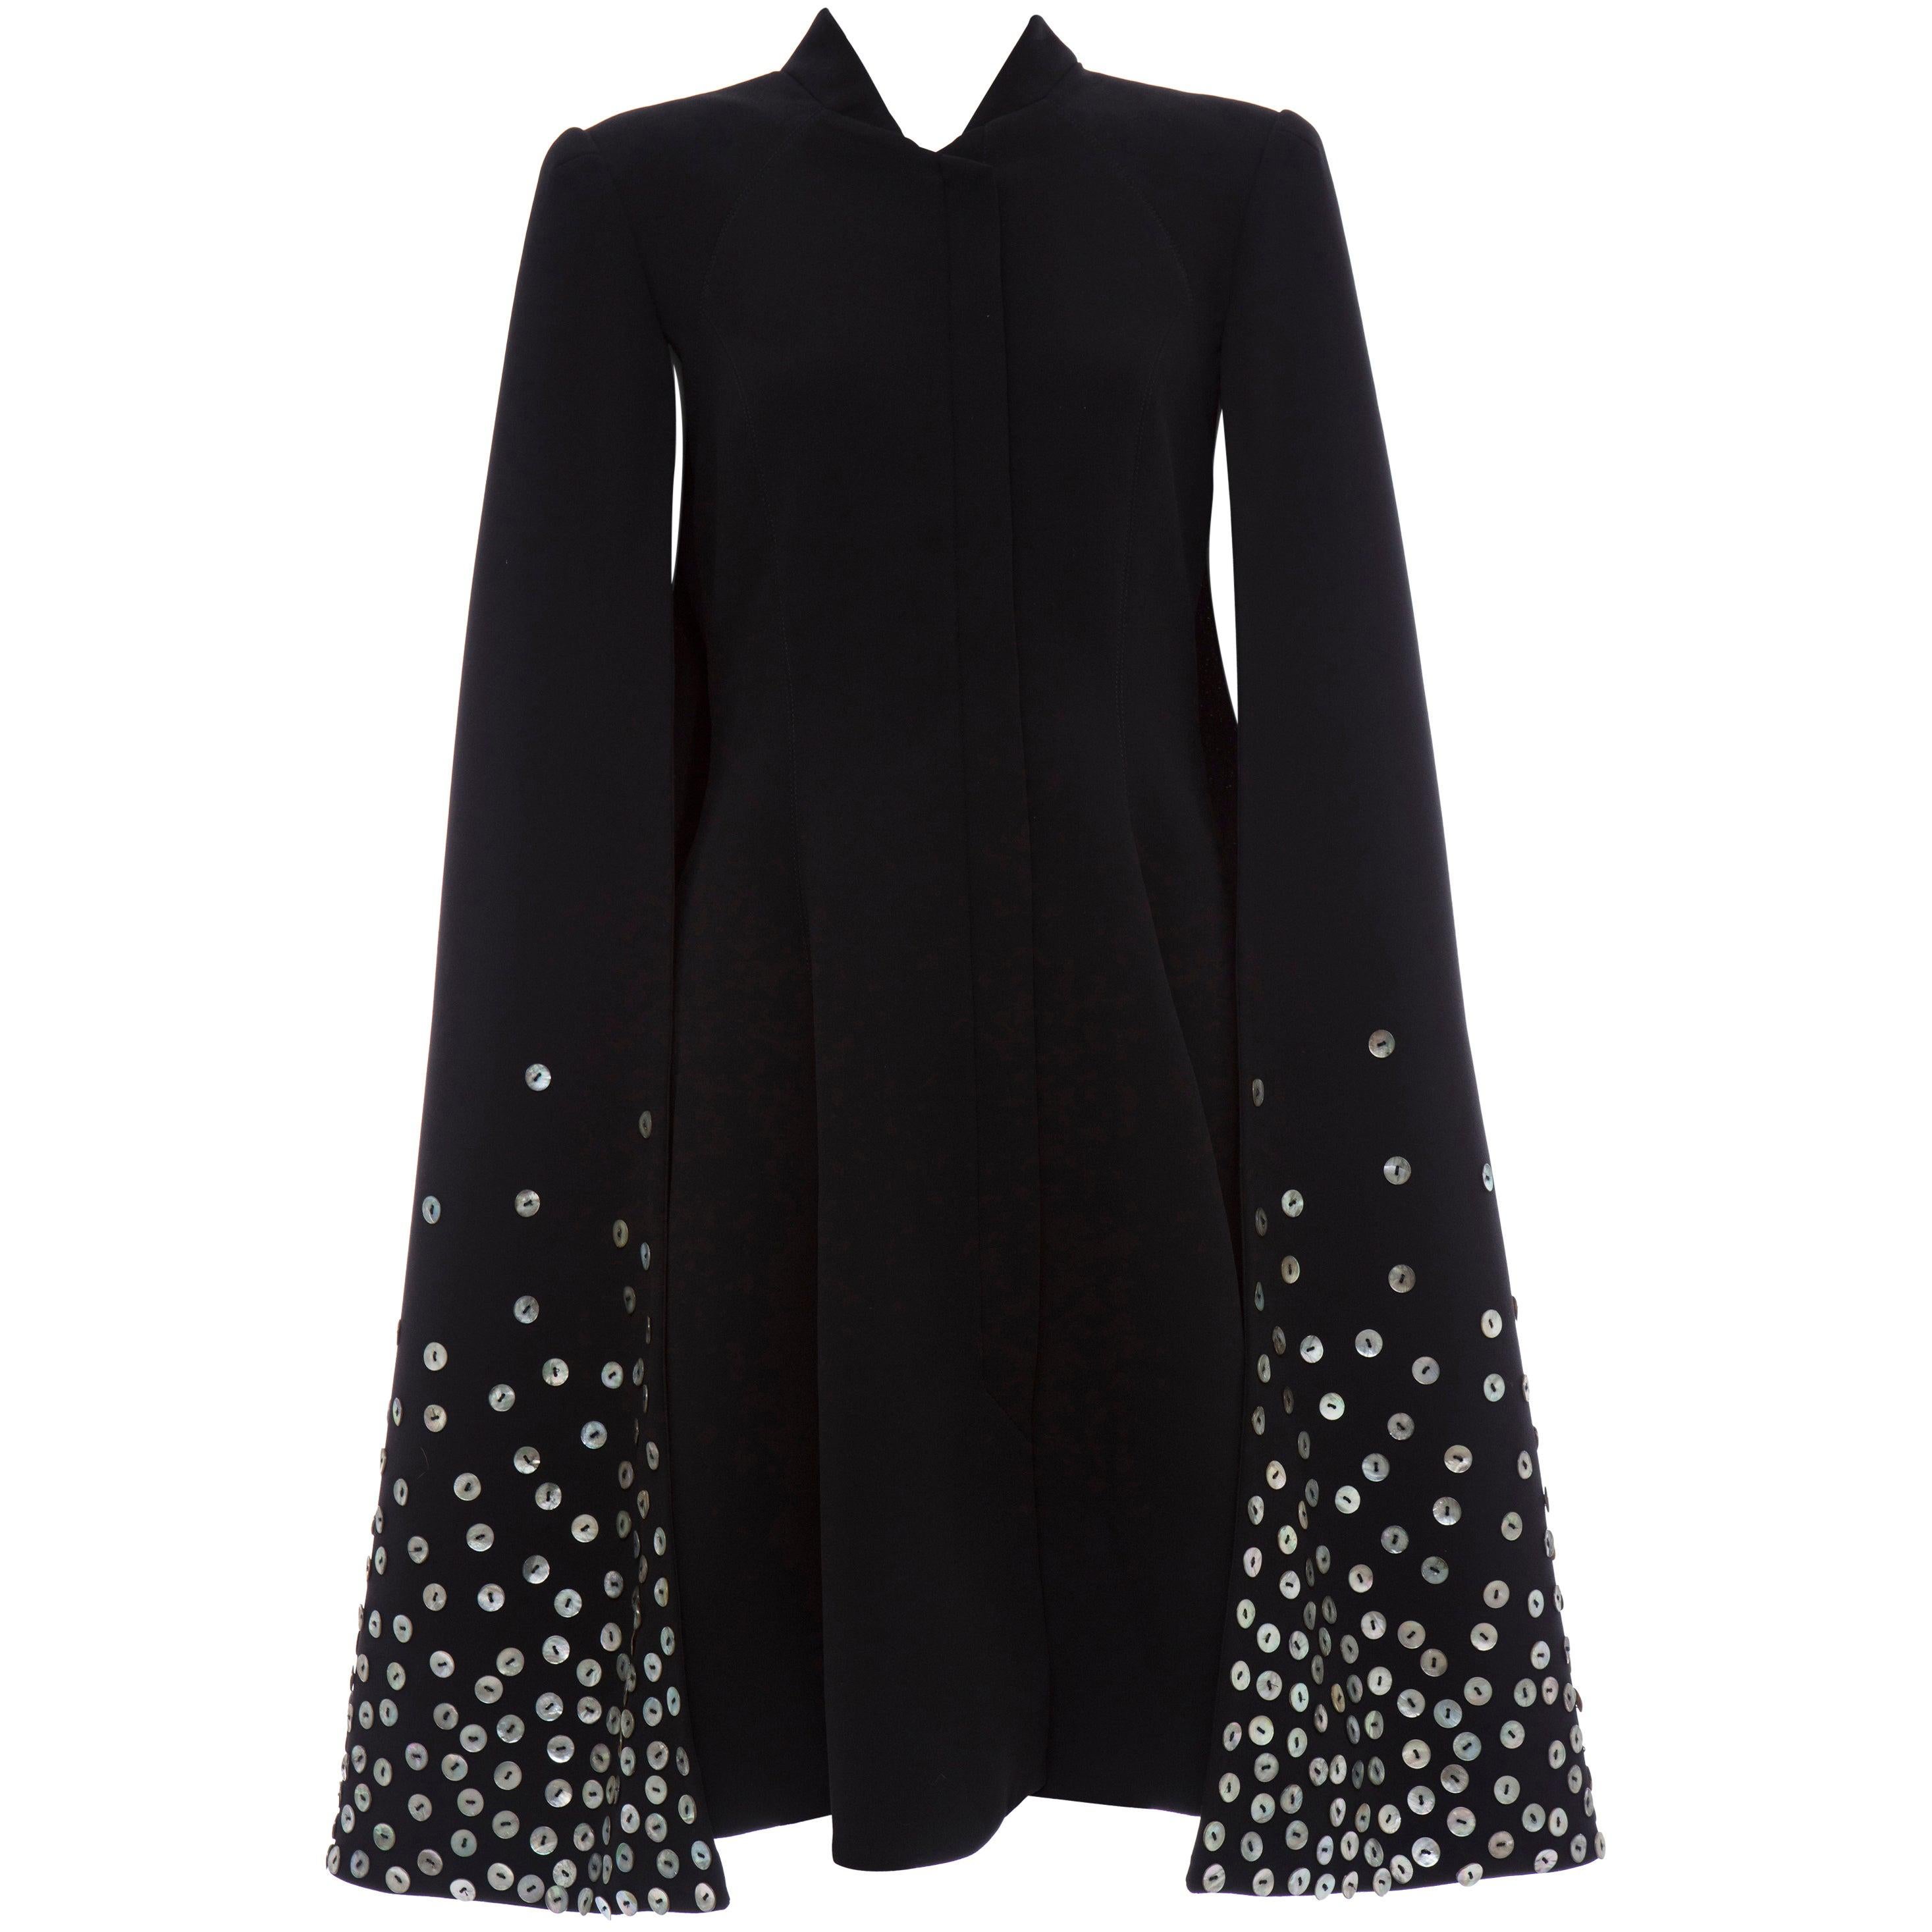 Gareth Pugh Zip Front Black Dress With Mother of Pearl Cape, Spring 2015 For Sale